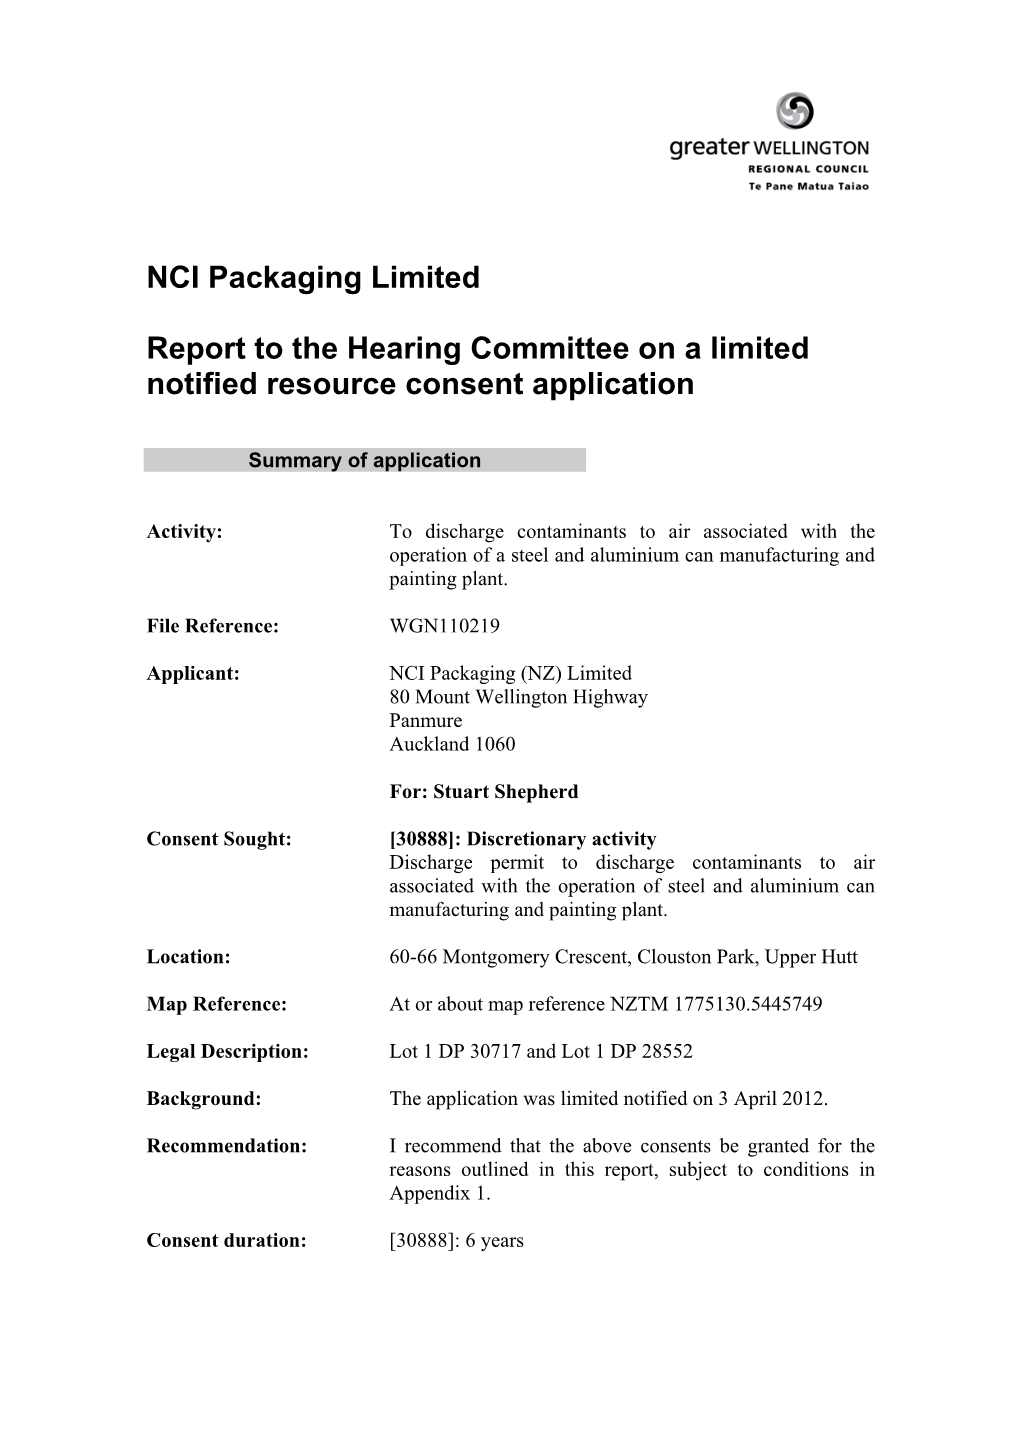 By NCI Packaging (New Zealand) Limited, to Discharge Contaminants to Air Associated with the Operation of a Can Manufacturing and Painting Plant